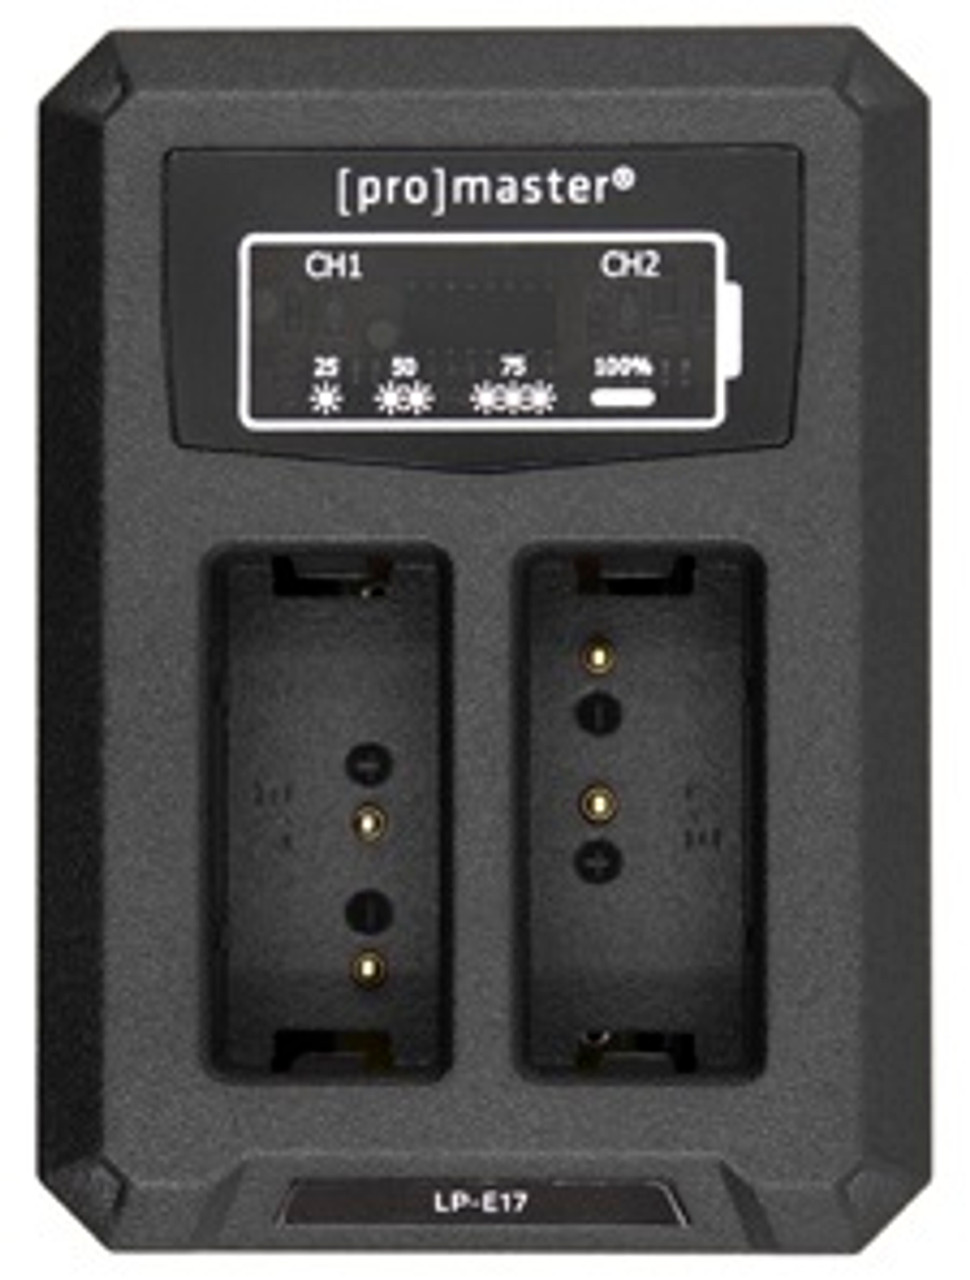 Promaster Dually Charger - USB for Canon LP-E17 